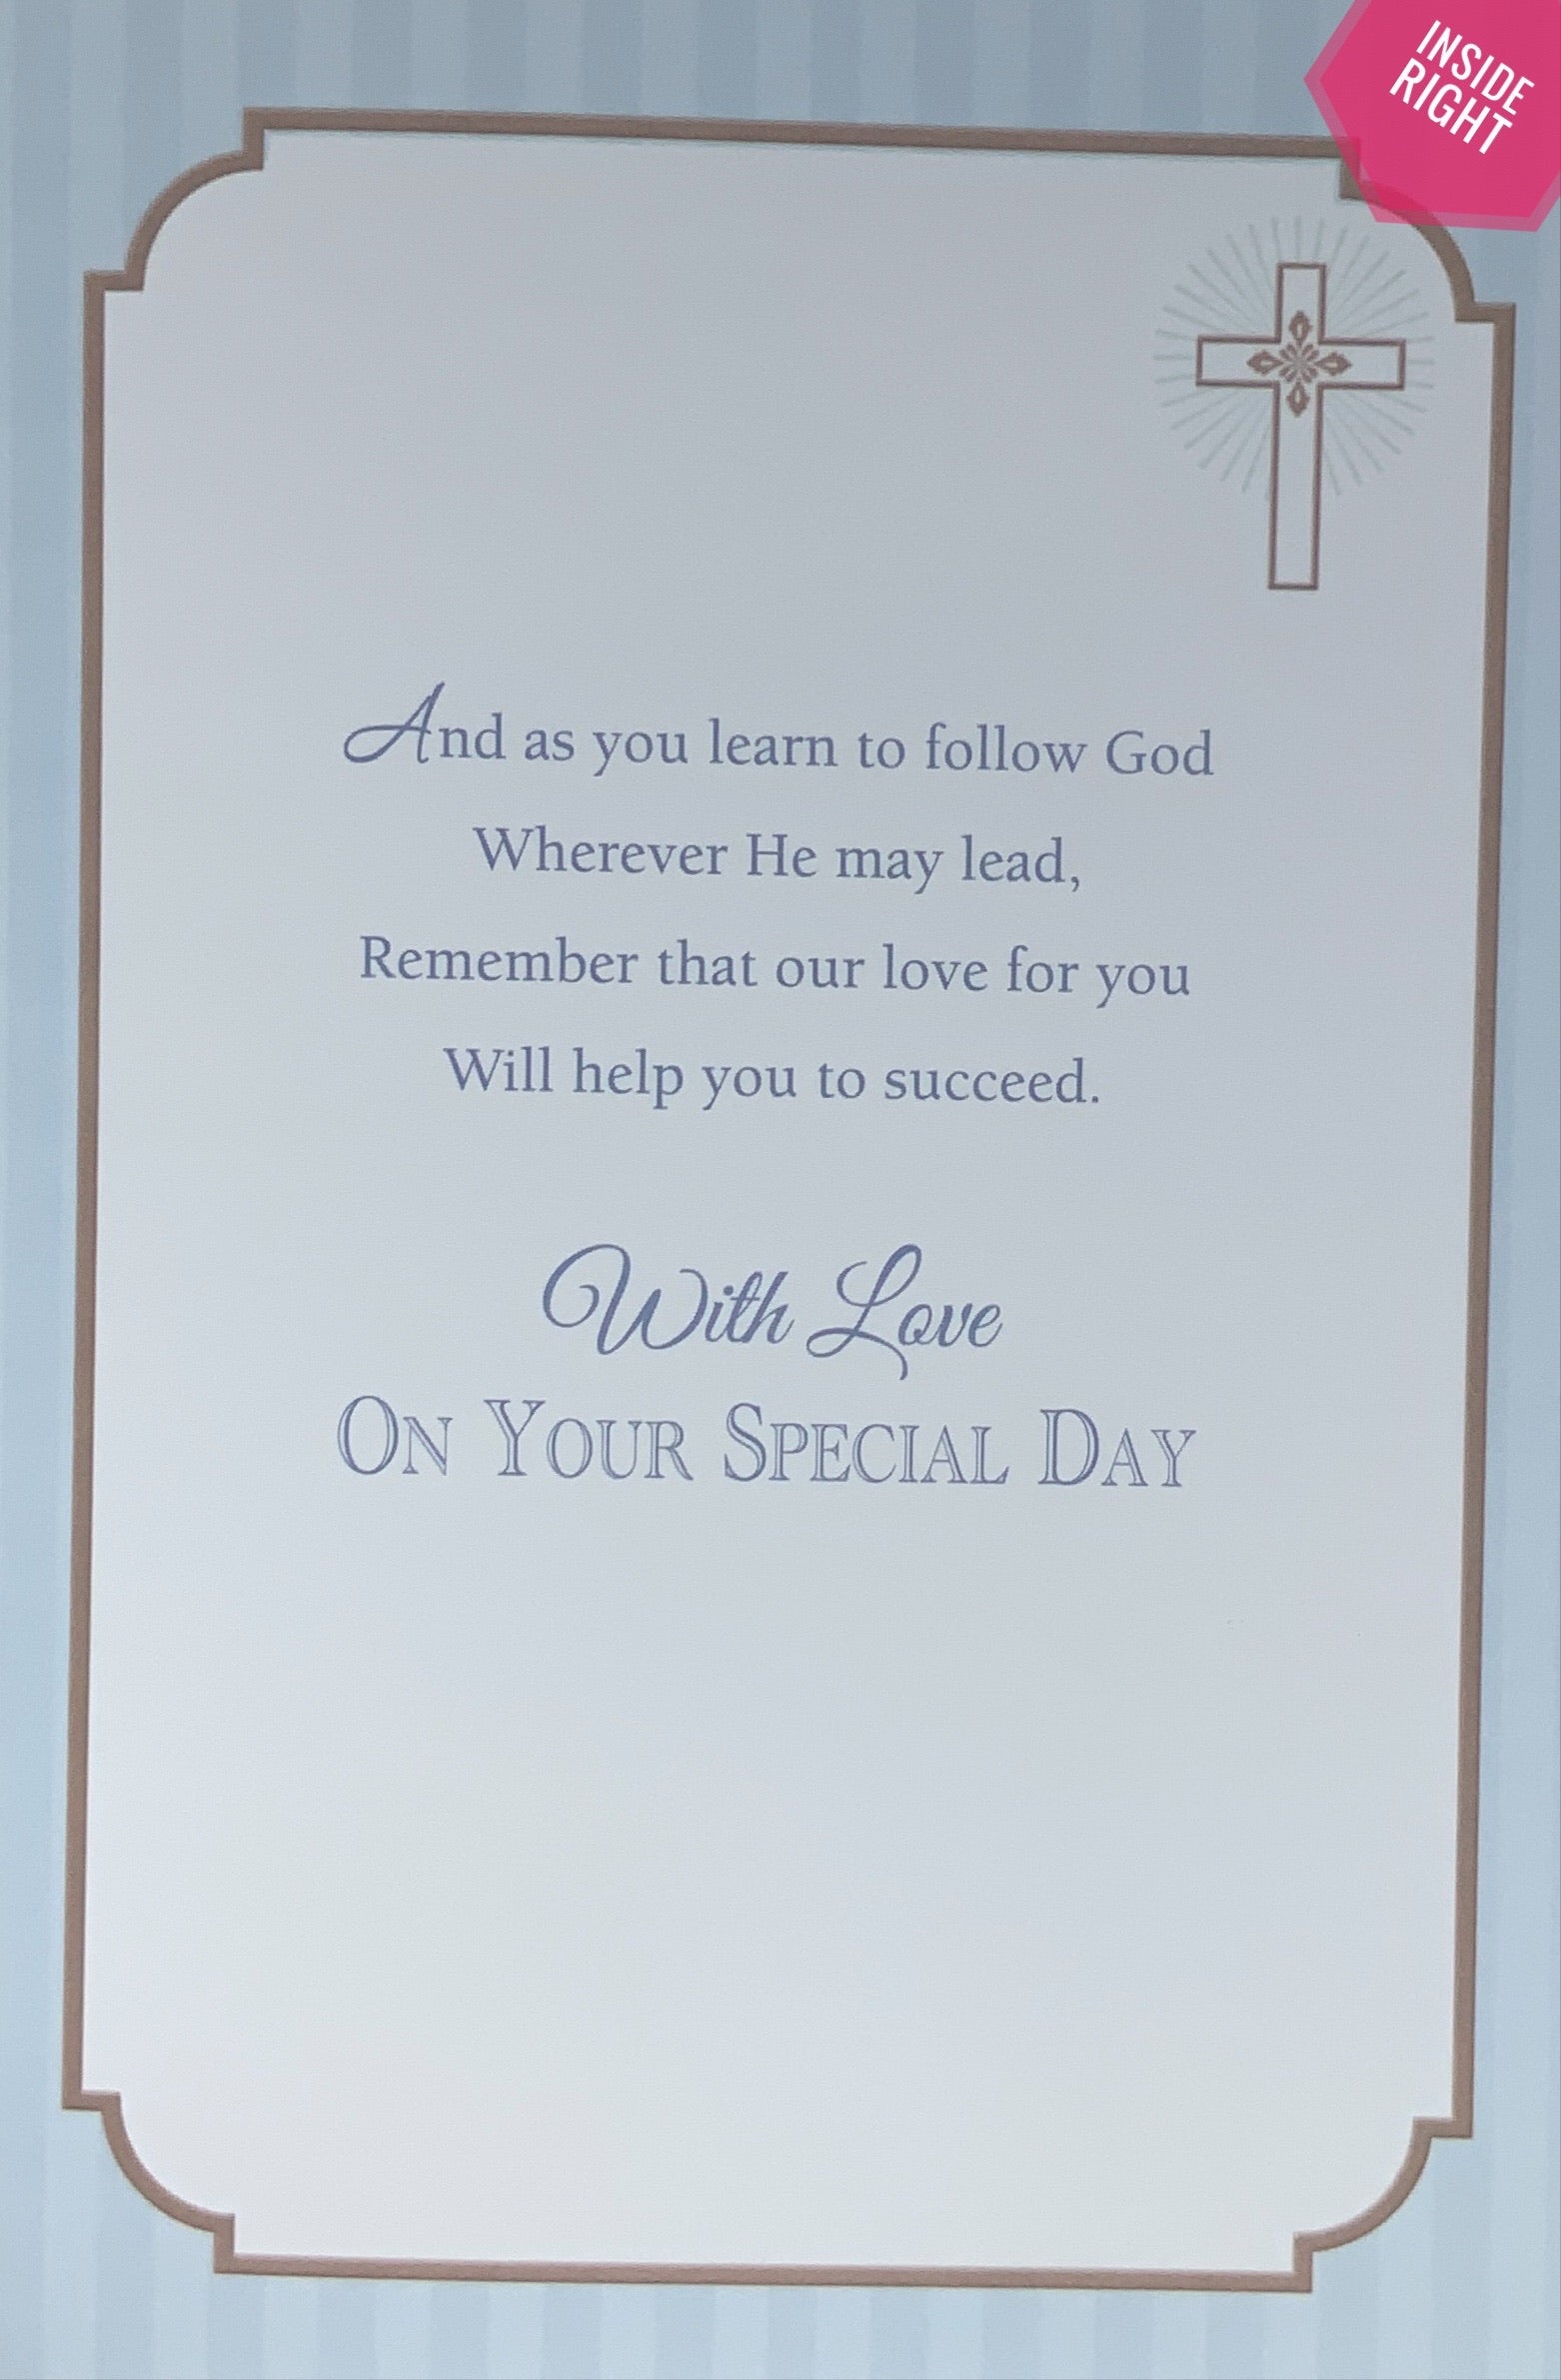 Confirmation Card - Son On The Day Of Your Confirmation